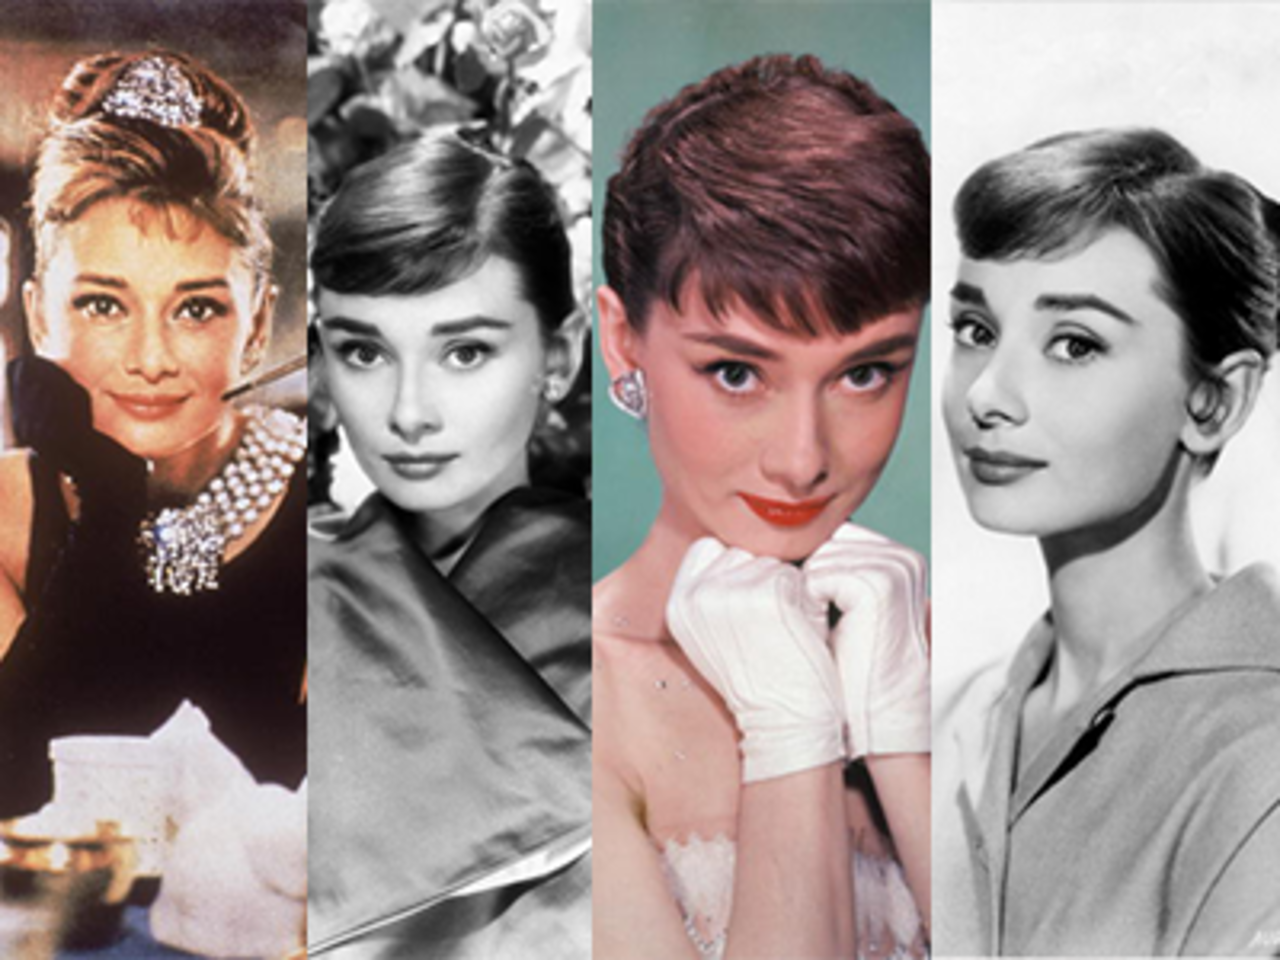 Audrey Hepburn's Birthday: A Look Back at Her Most Iconic Looks